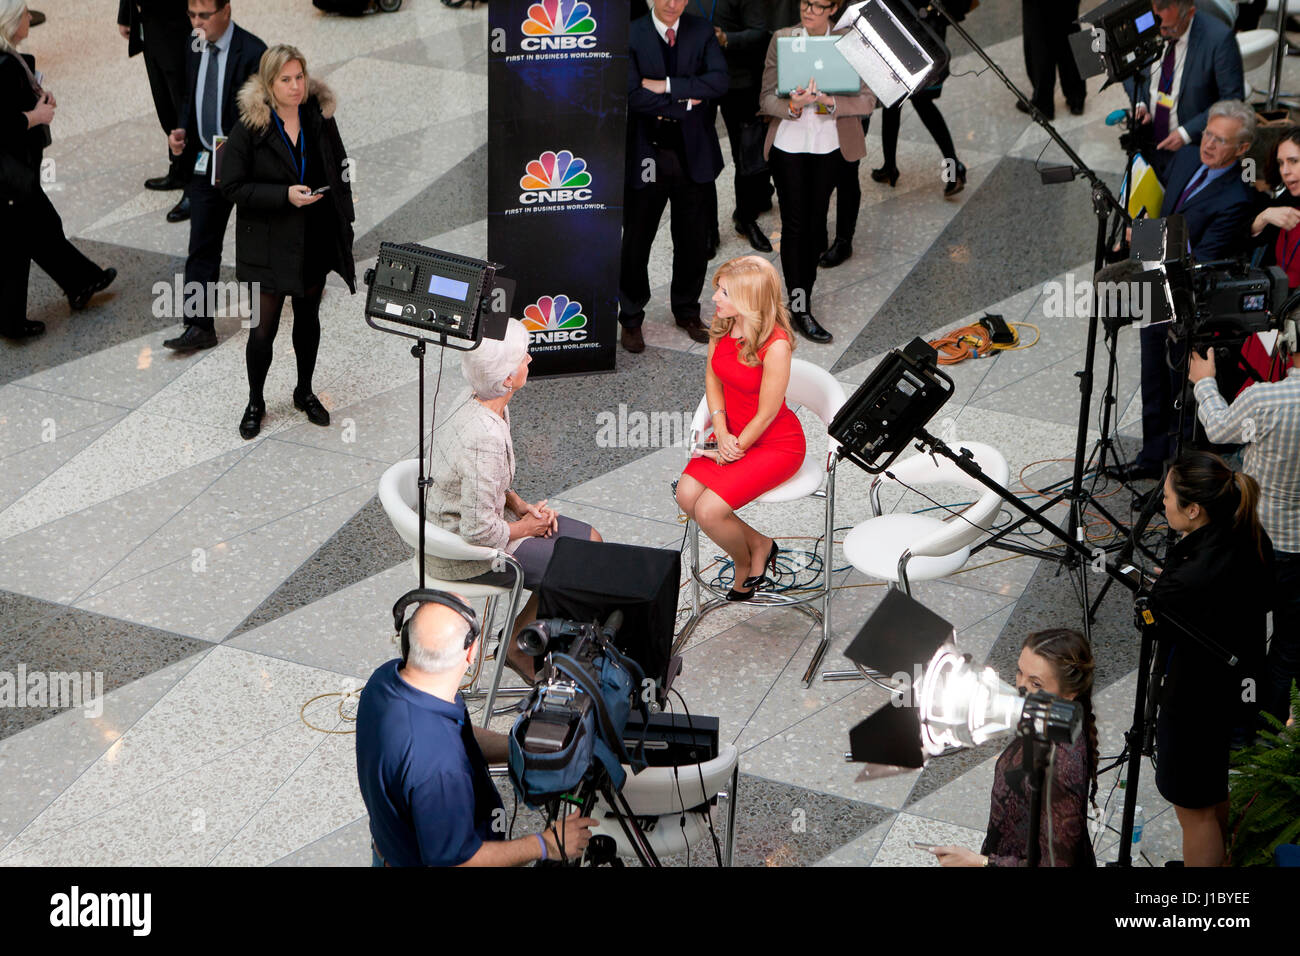 TV news interview set from above - USA Stock Photo